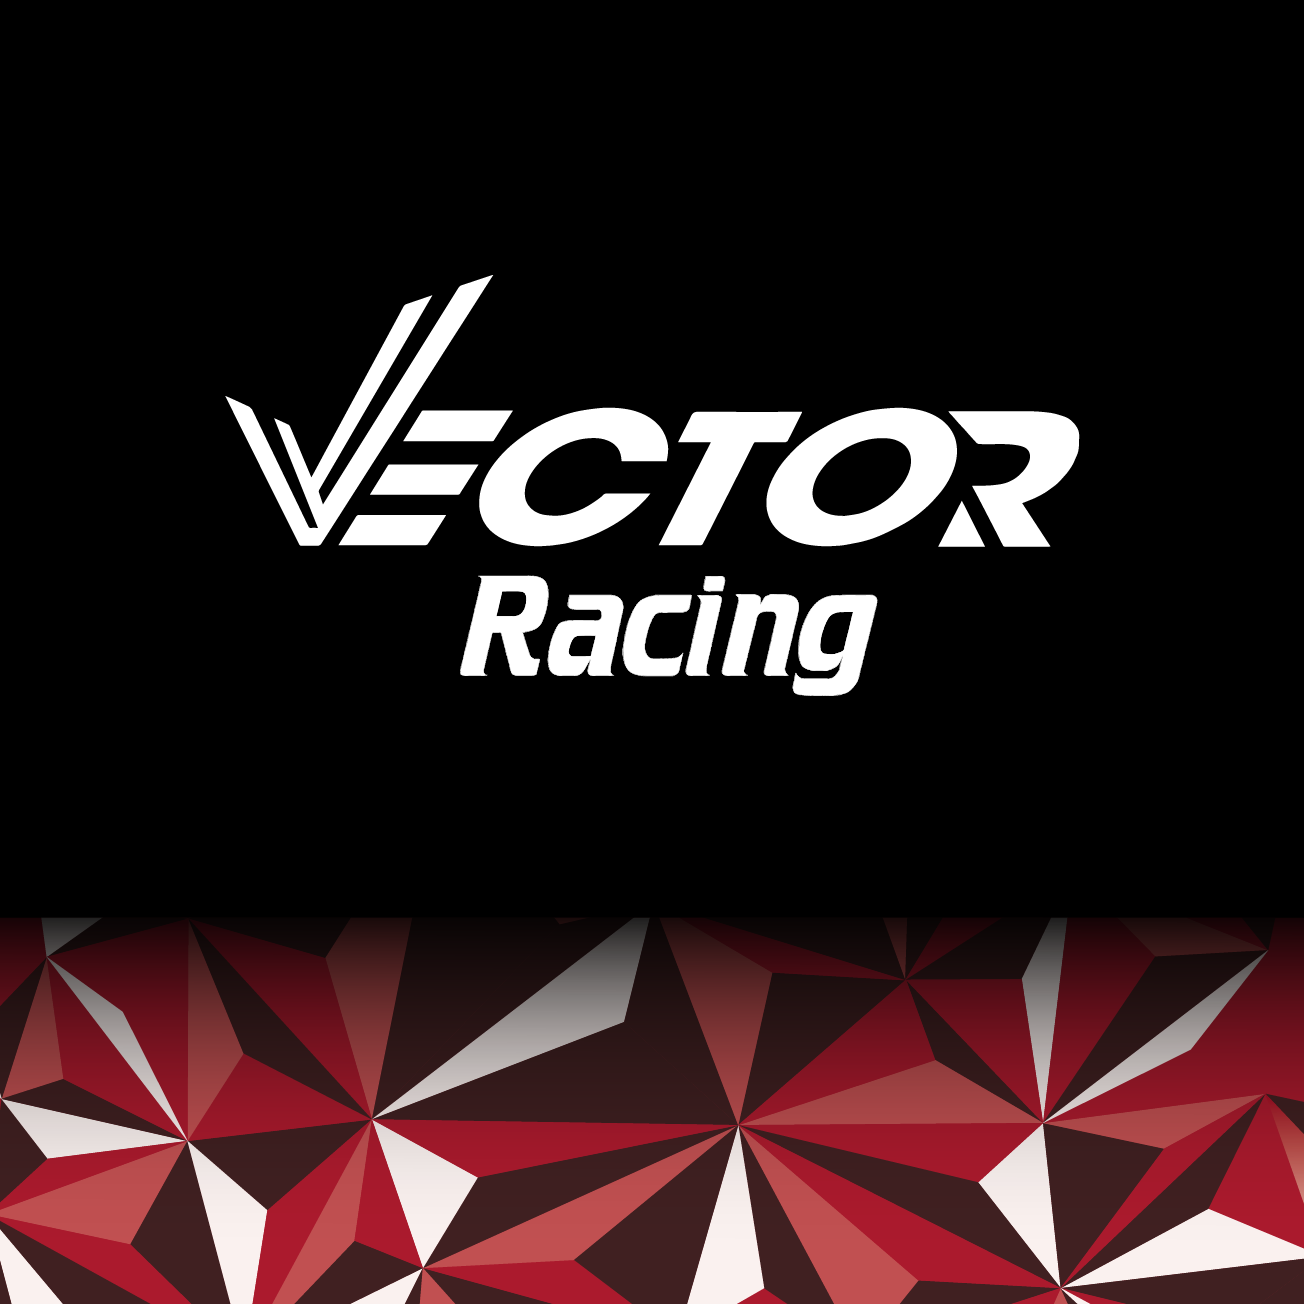 Club Image for VECTOR RACING